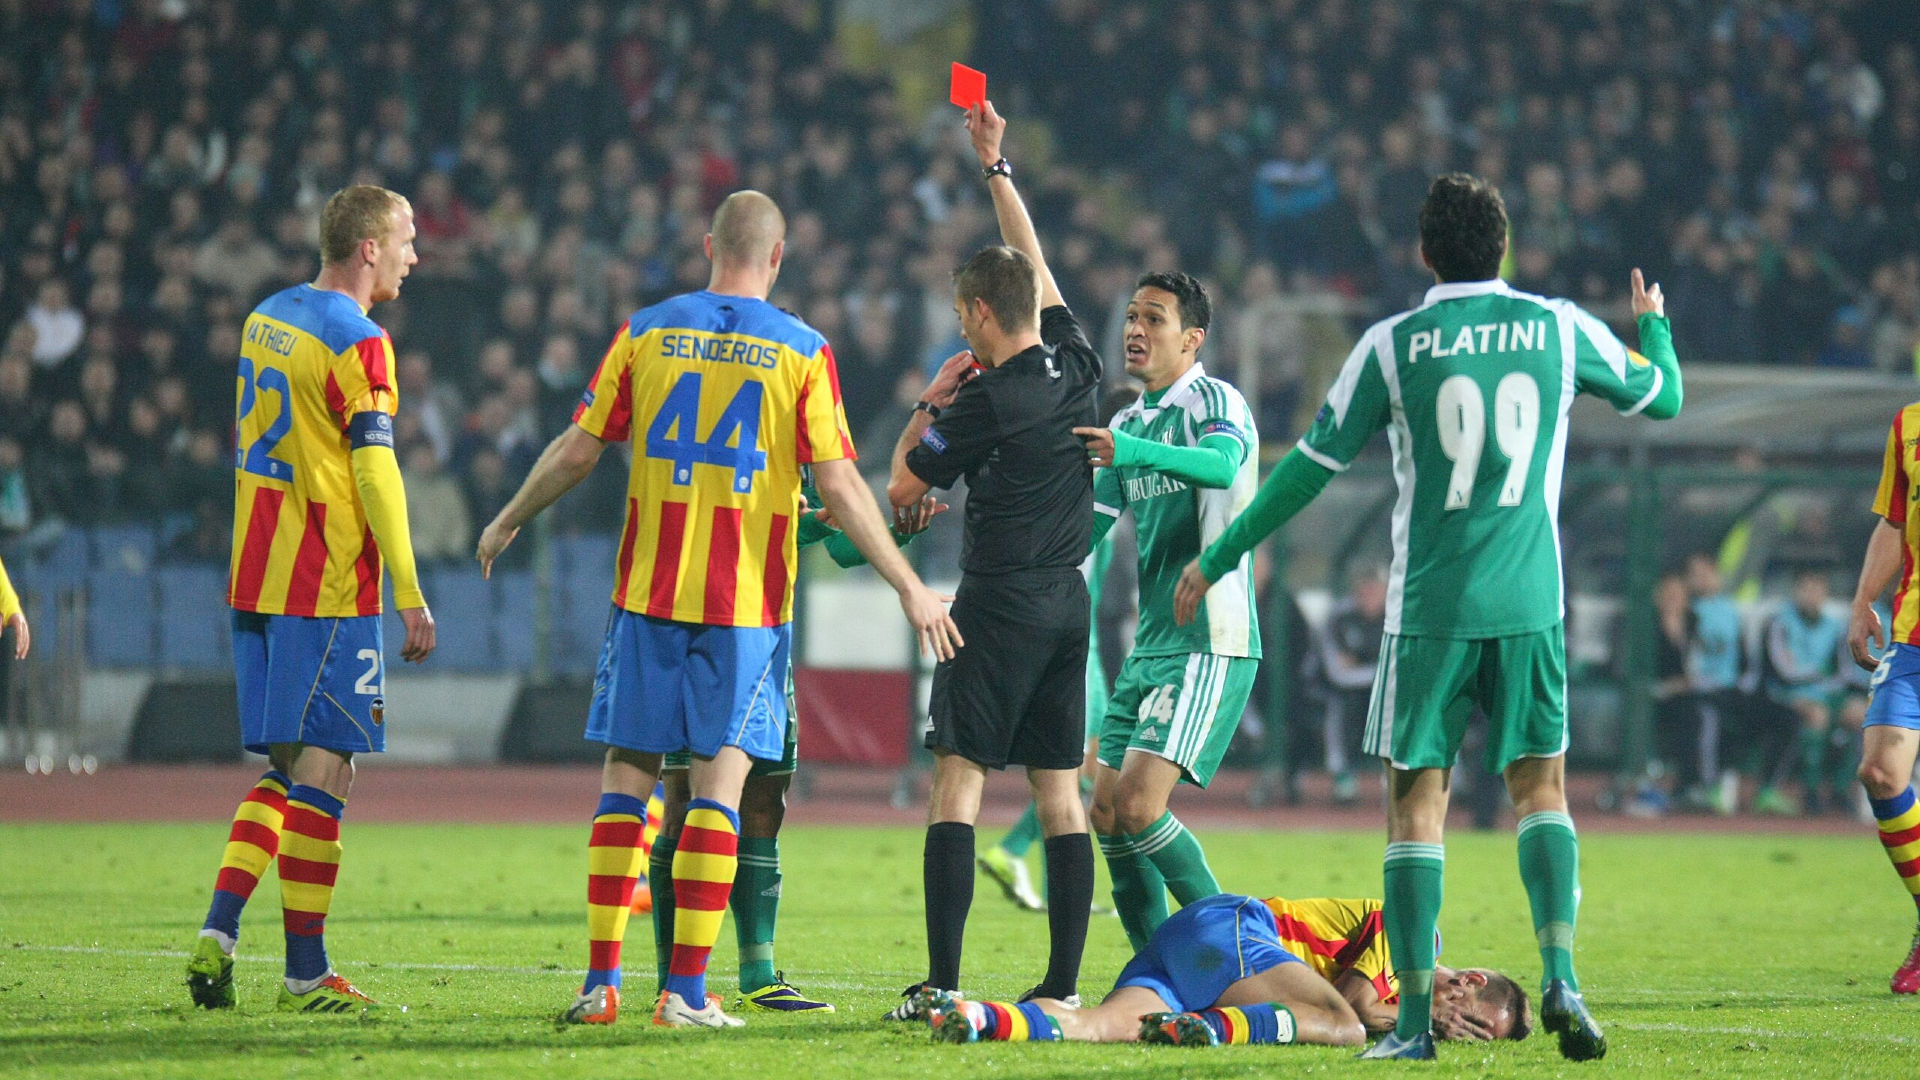 A Look At All The Penalty Cards In Football: Red, Yellow And Now Blue